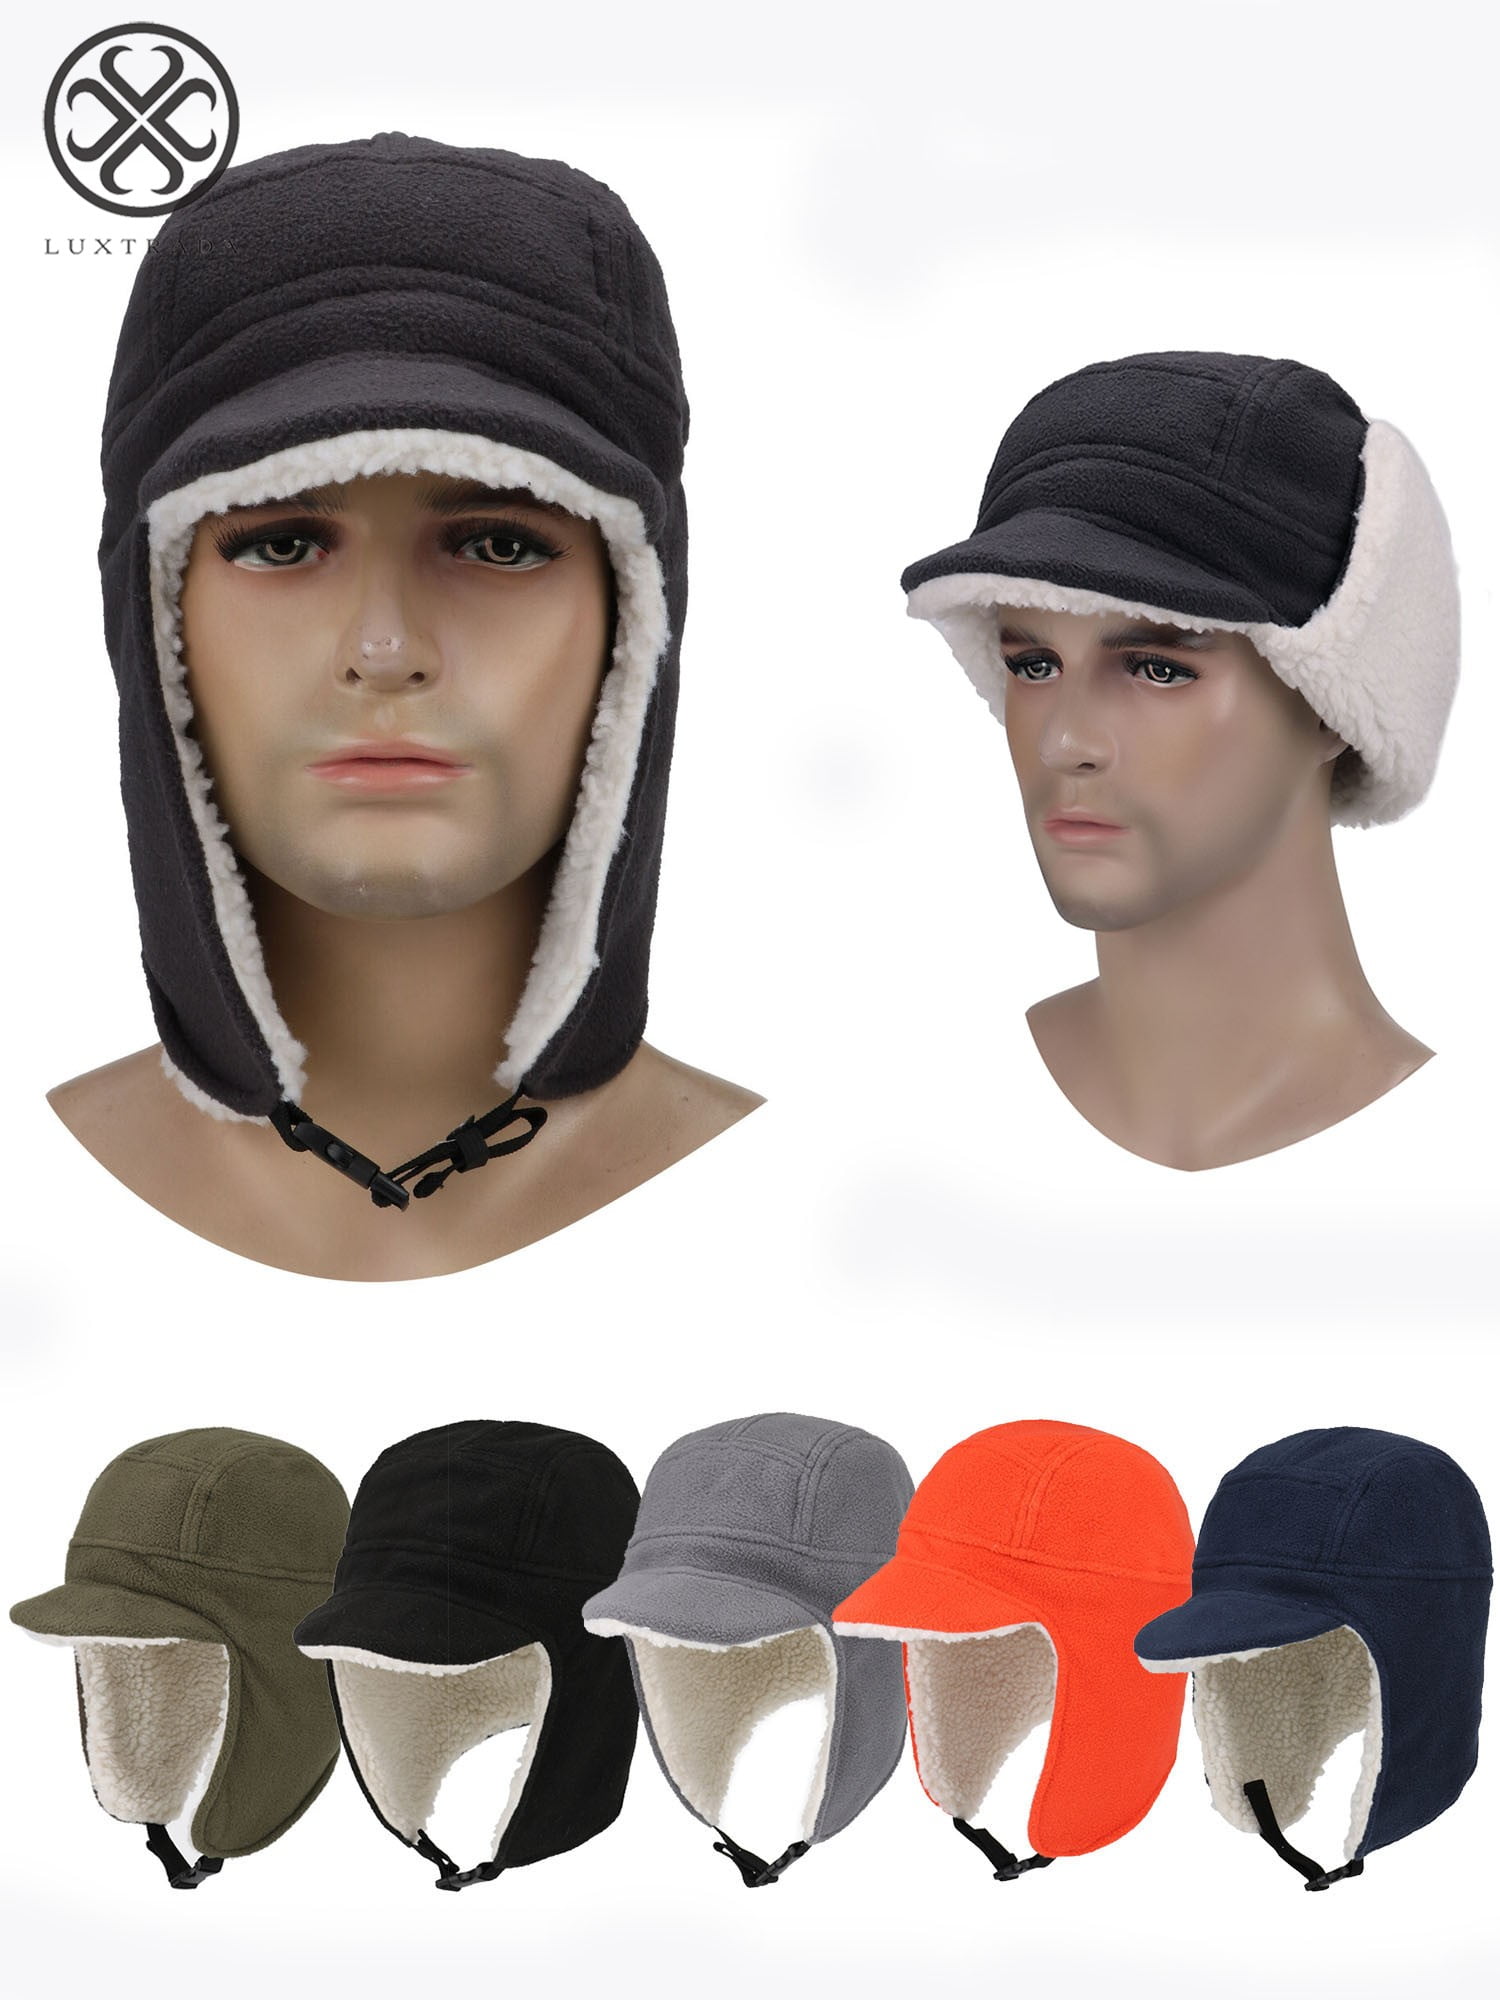 GREEN BLACK or BLUE Fleece Low Profile Baseball Cap Hat with foldable Earflaps 